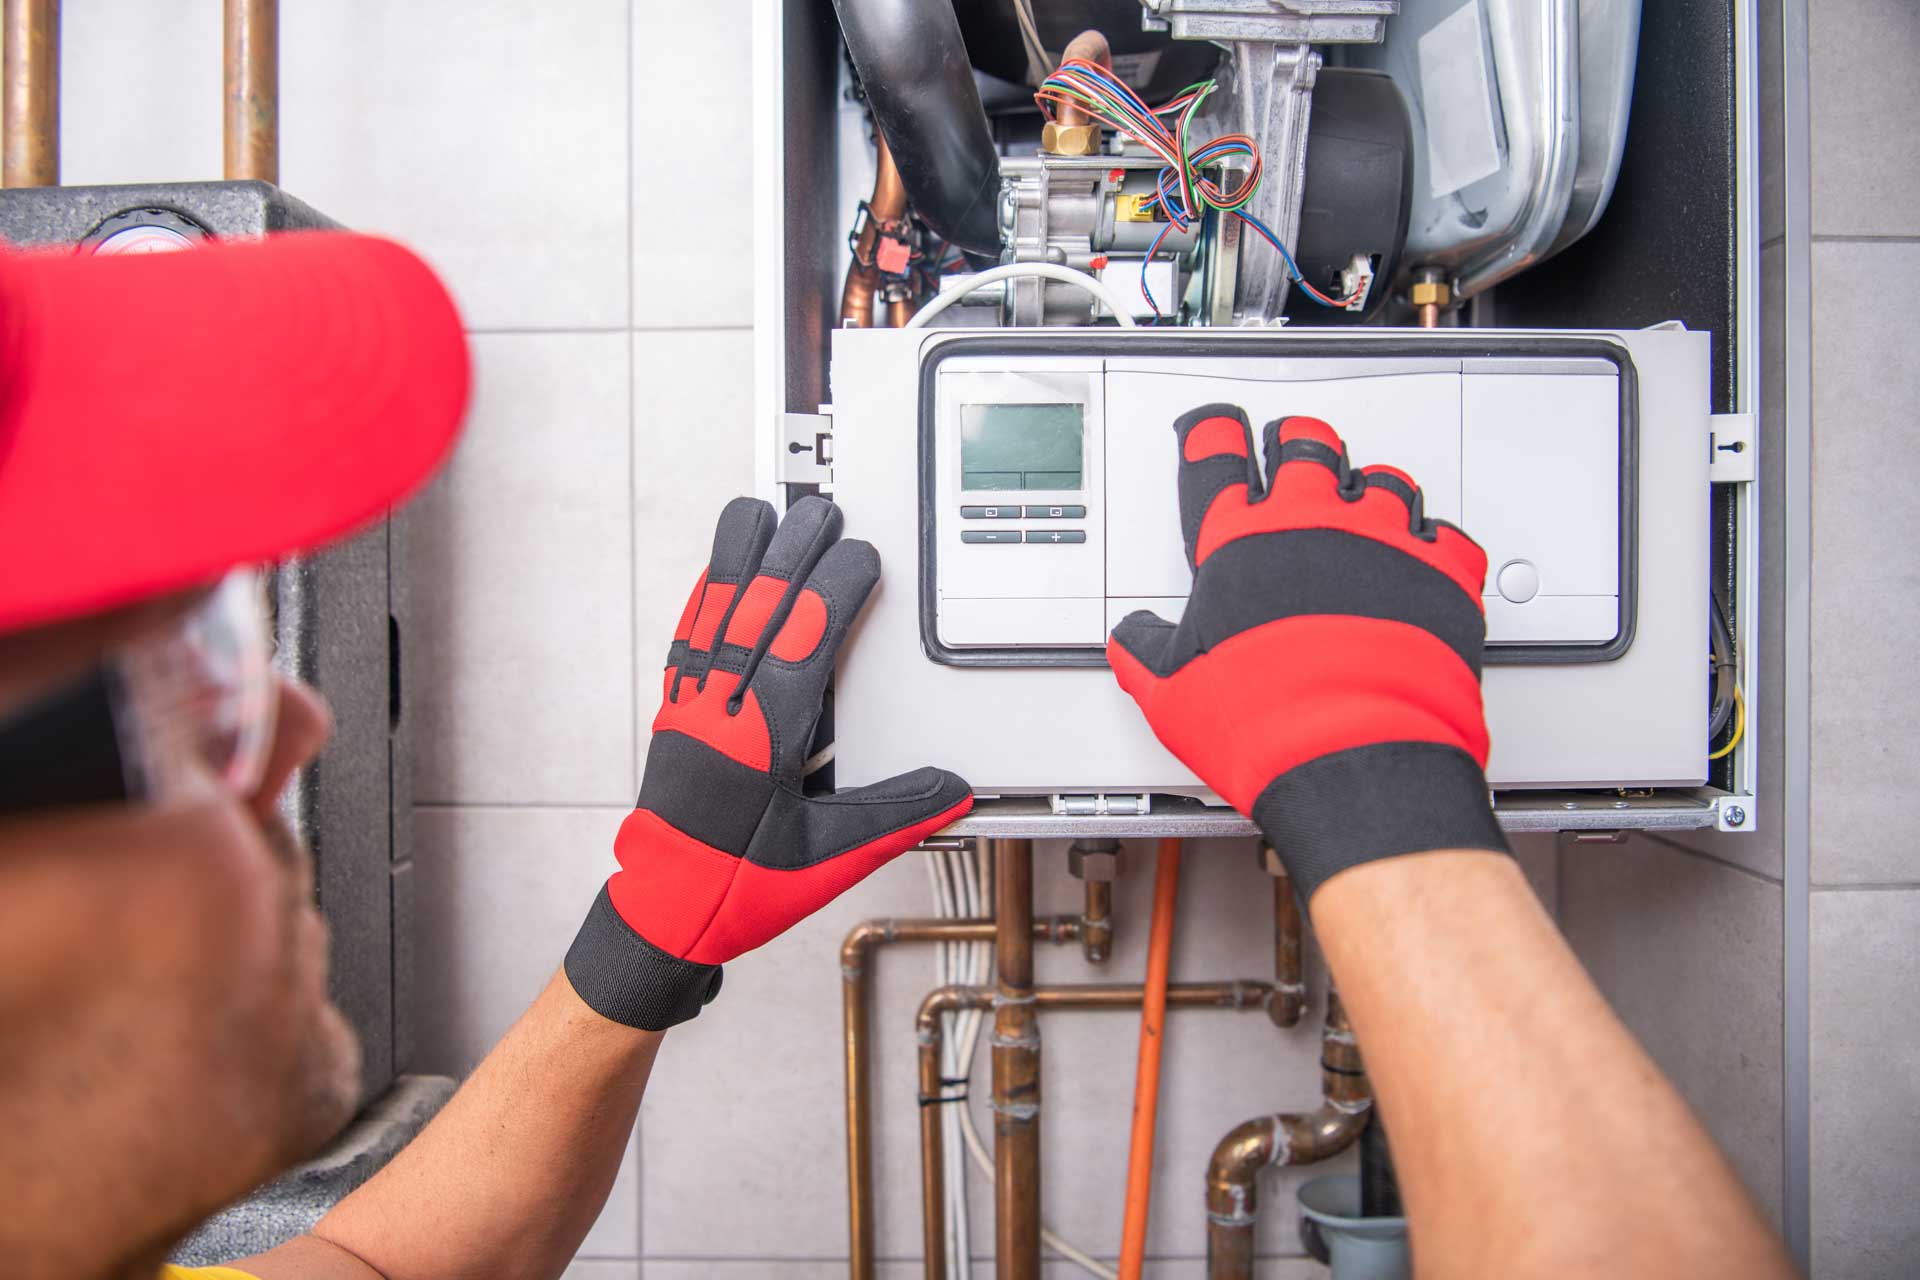 Technician in a red cap and gloves adjusts settings on a residential gas furnace's gas line control panel.